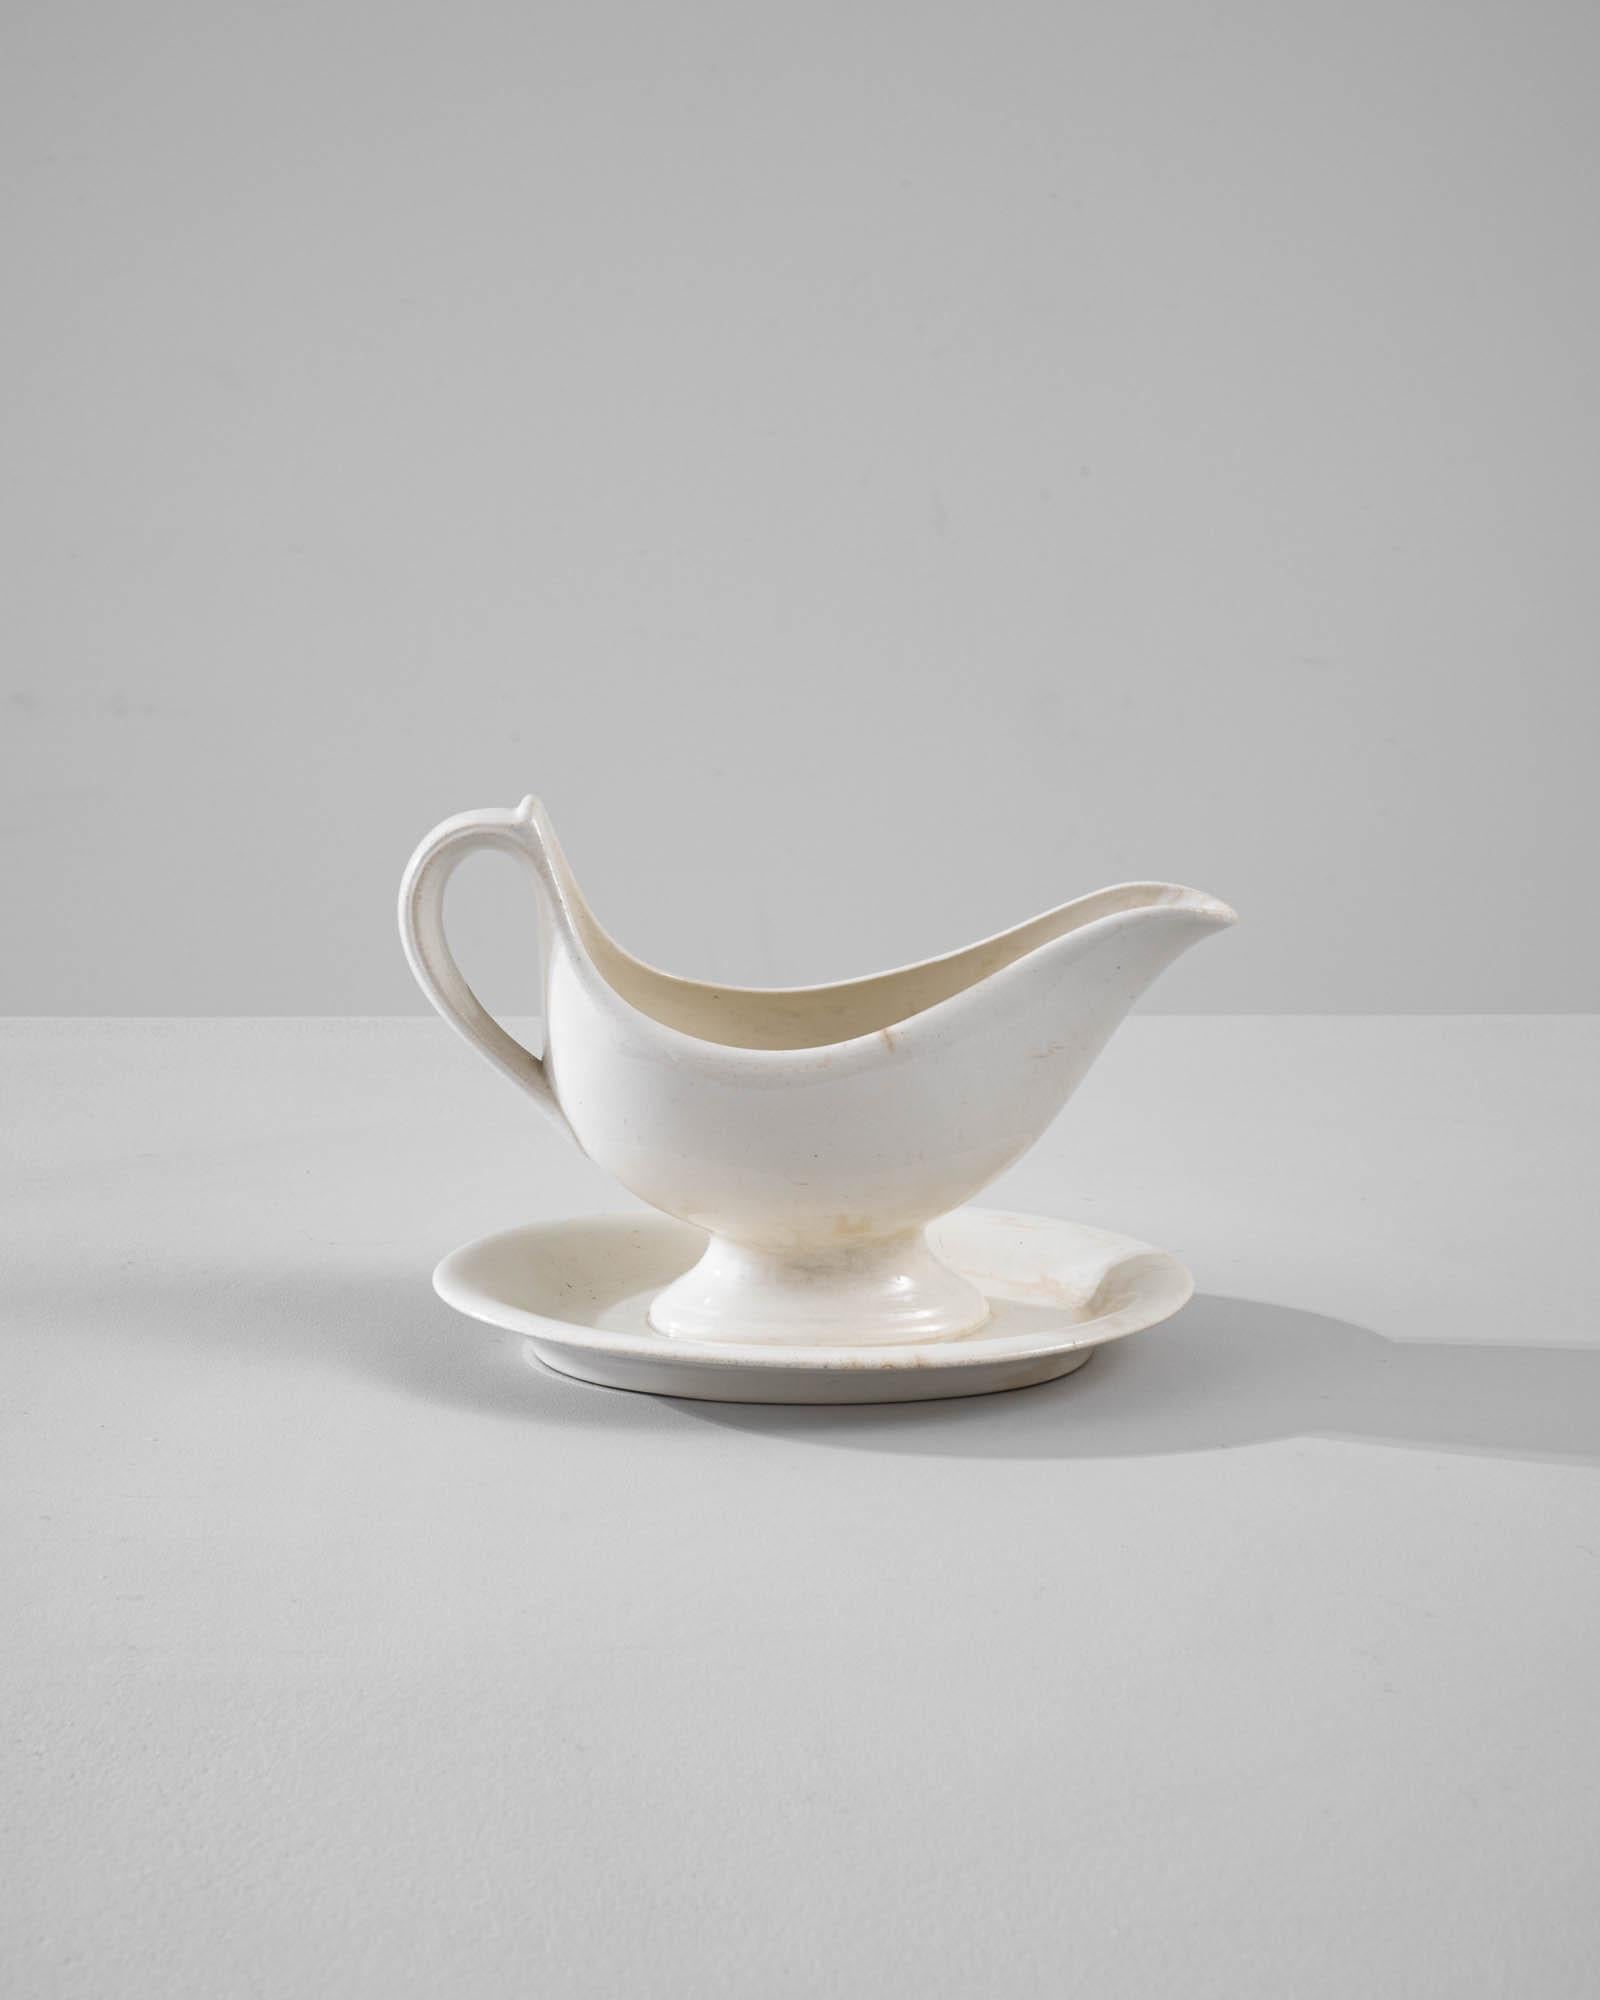 A vintage porcelain sauce boat made in Belgium, circa 1900. White china is finished with a luscious glossy glaze, elevating the superior form and subtle vintage patina of this finely crafted table piece. The delicate contour and out-turned lip of